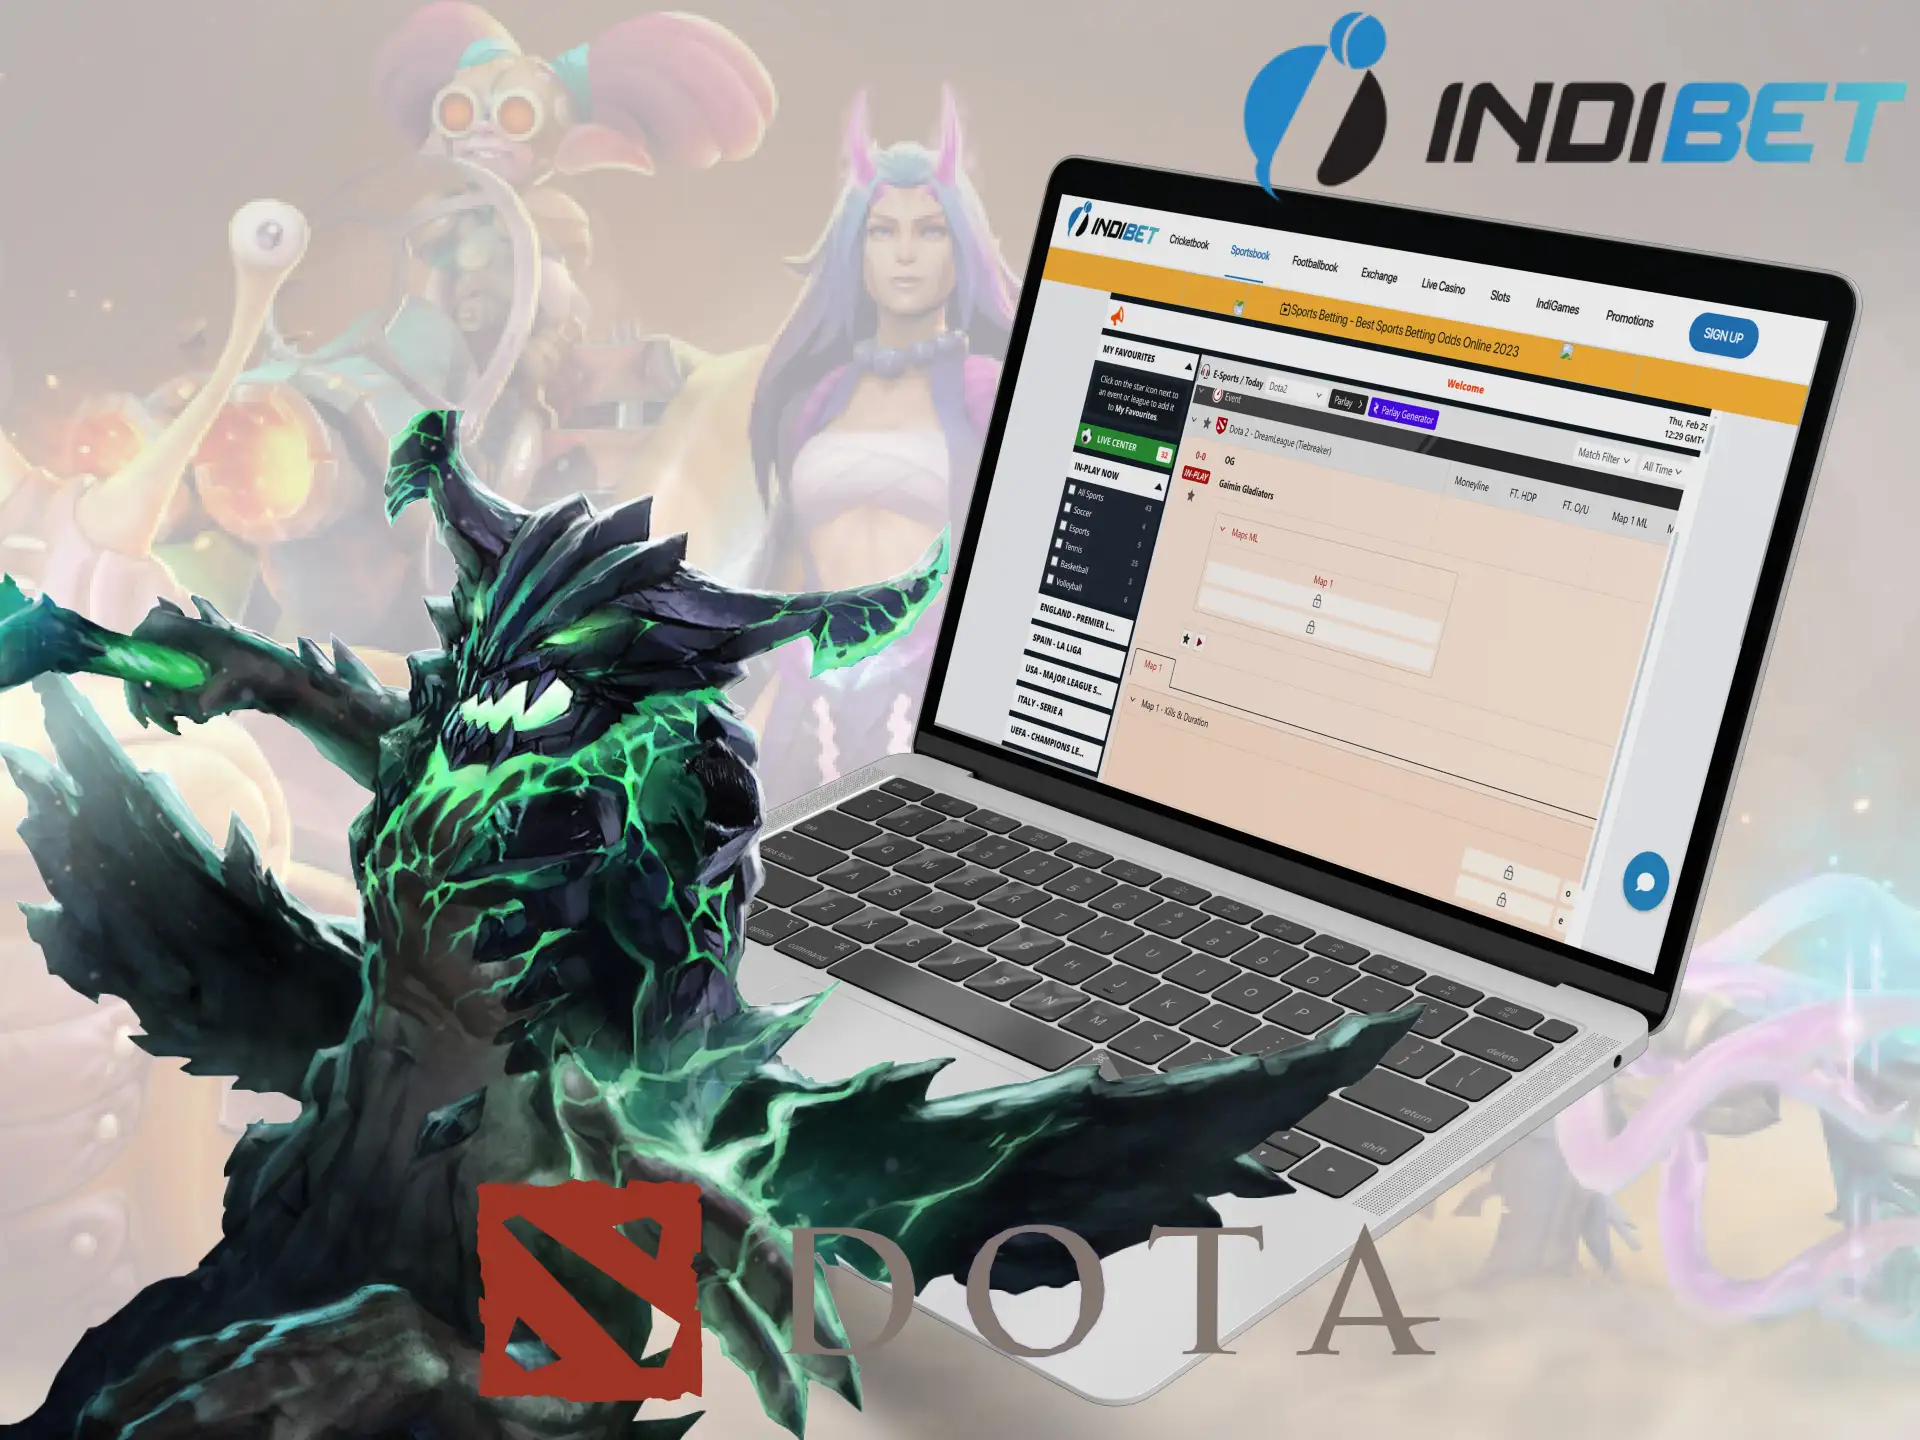 Indibet offers betting on cyber sports disciplines including Dota 2.